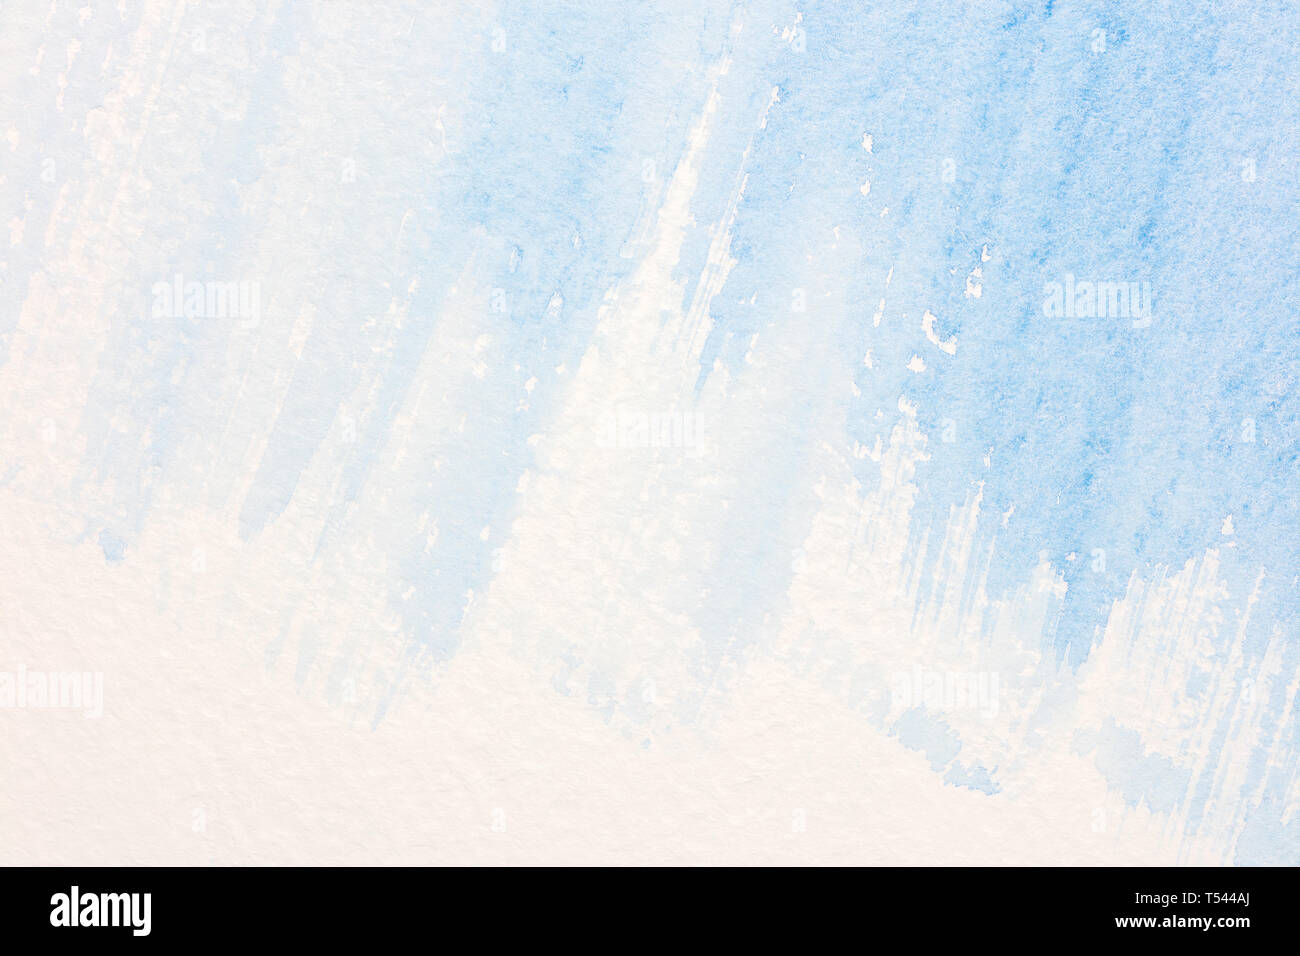 hand painted blue watercolor brush strokes. abstract background on textured paper Stock Photo